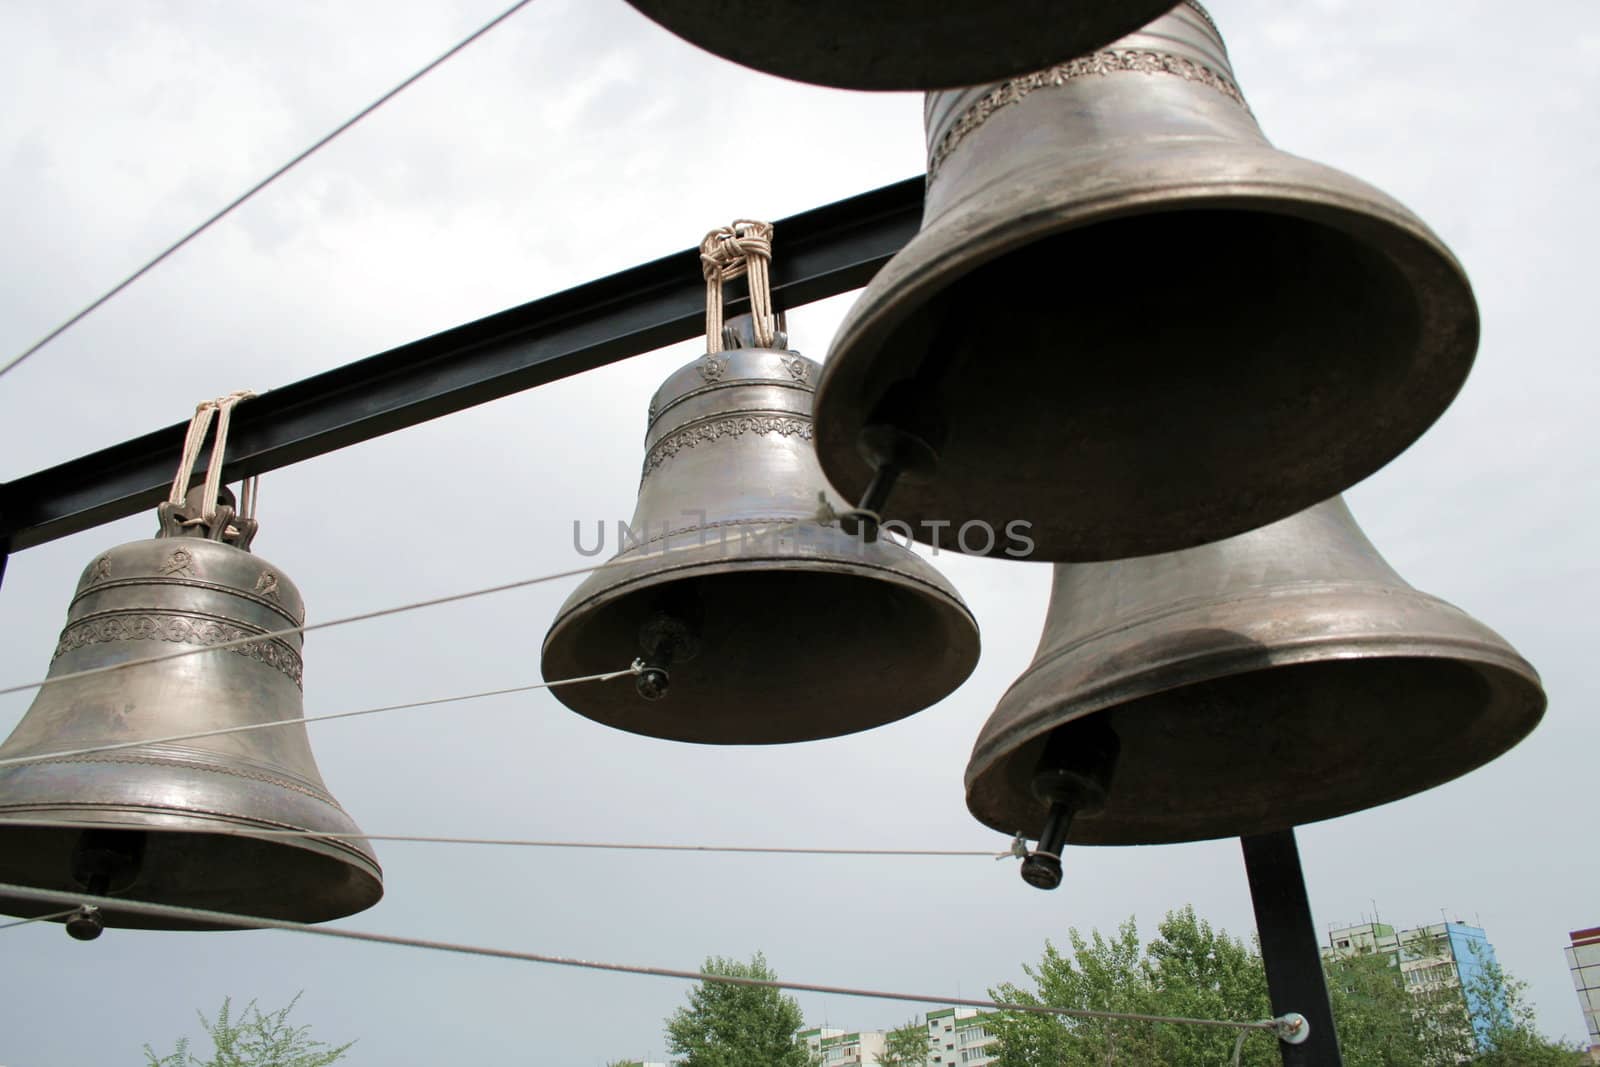 bells for the bell tower by ichip